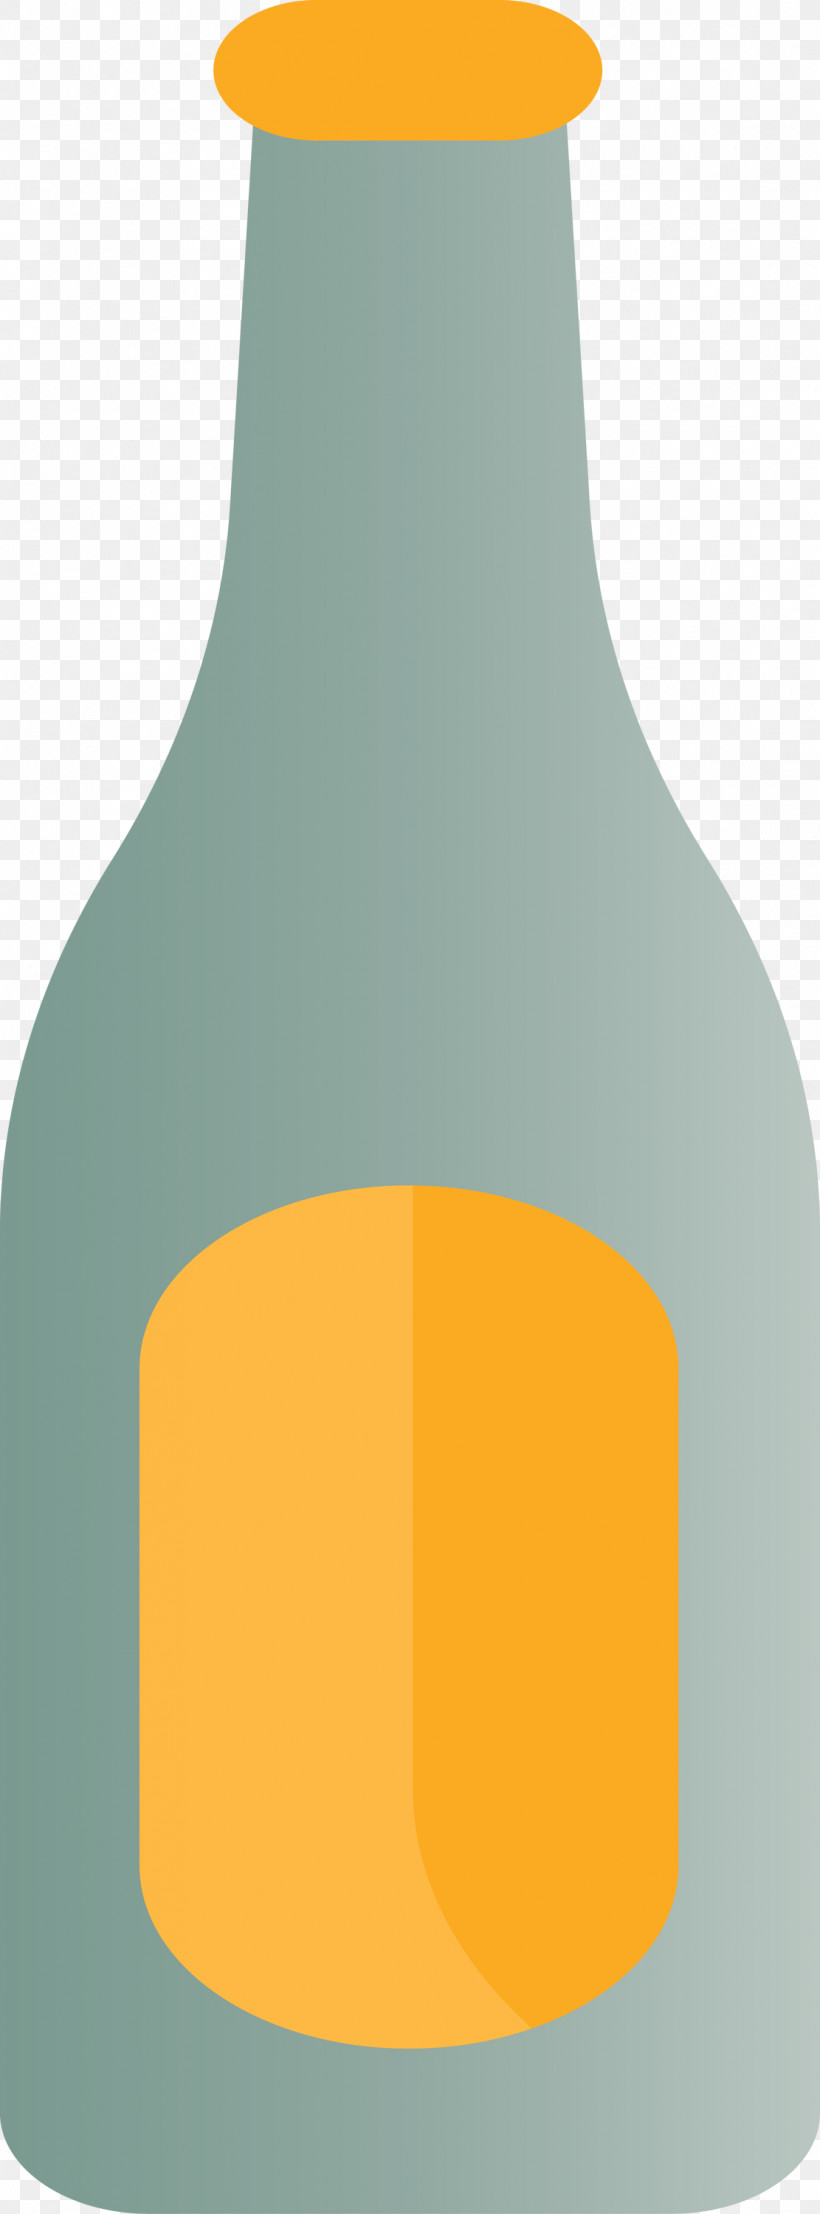 Glass Bottle Yellow Angle Glass Font, PNG, 1111x3000px, Glass Bottle, Angle, Bottle, Glass, Yellow Download Free